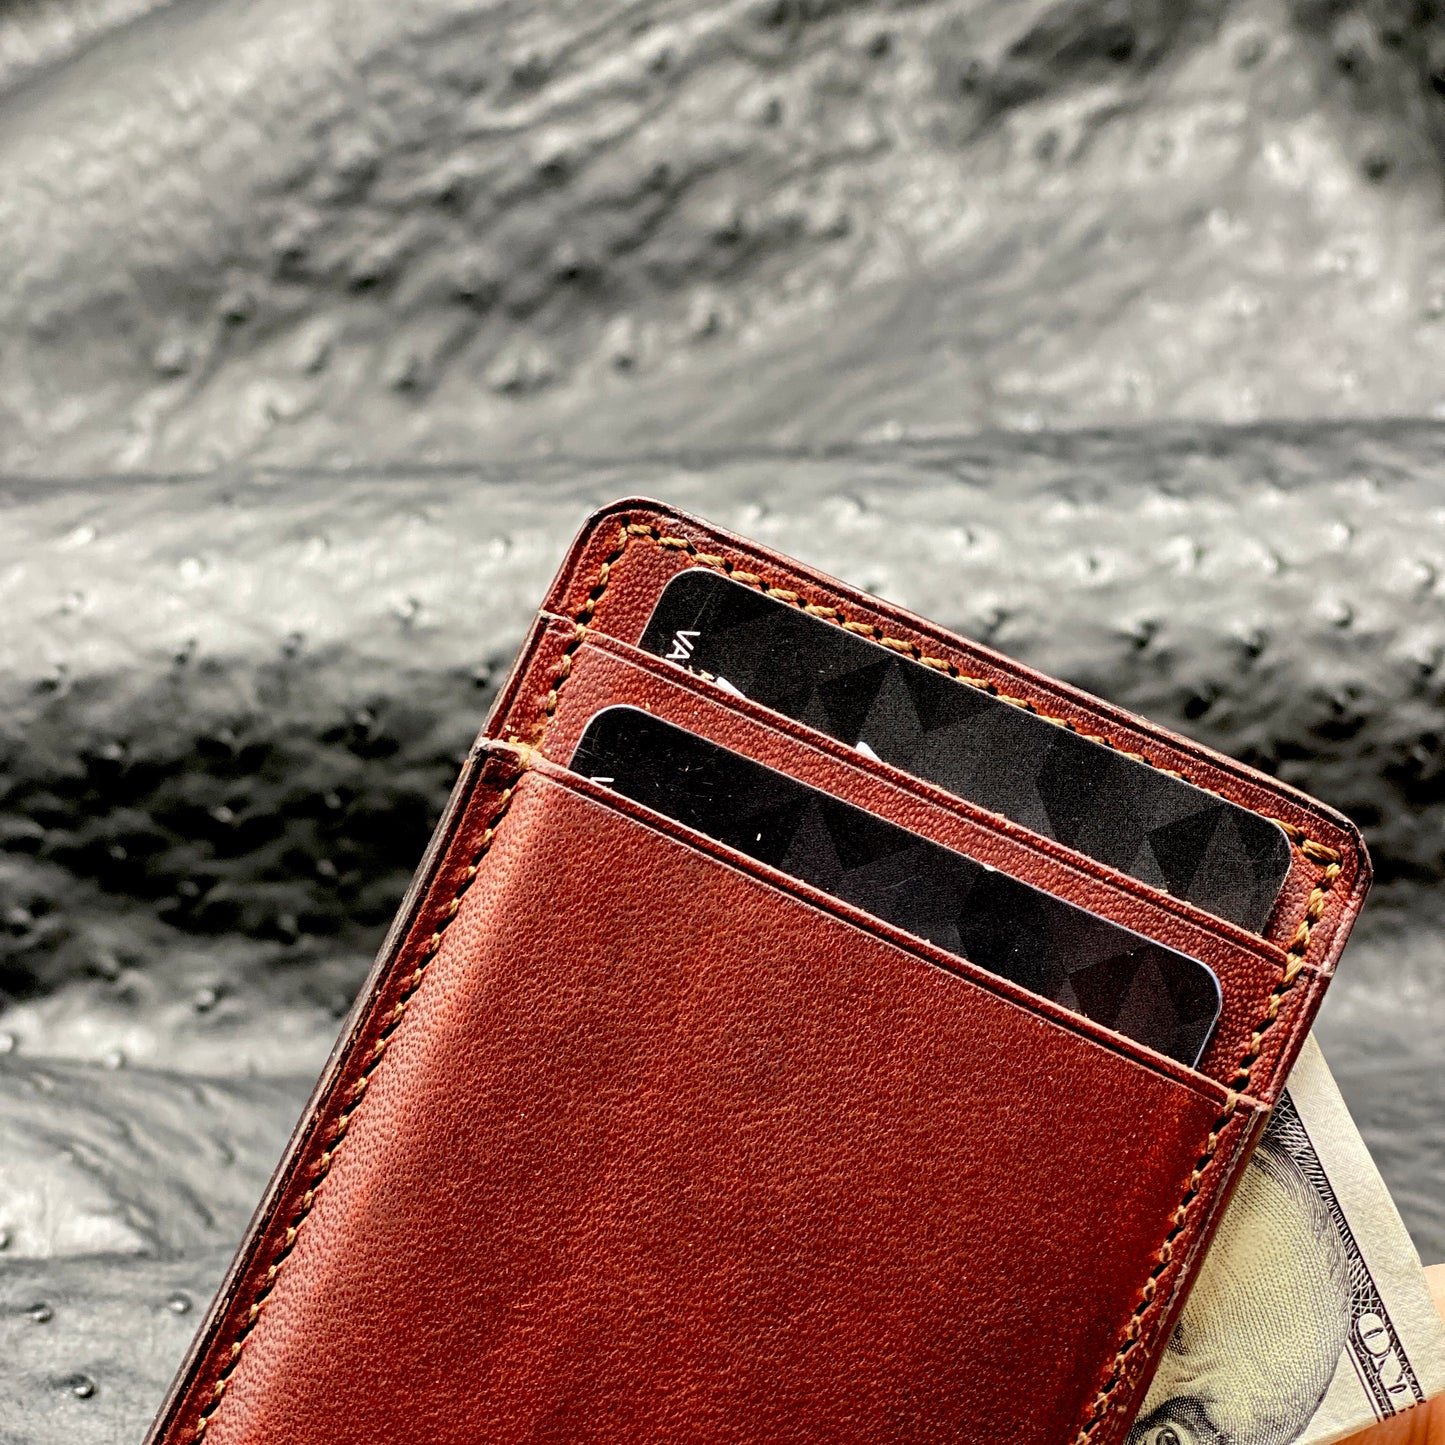 Handmade Minimalist MiniMax V2 wallet in Russet Brown Horween Leather | made in Houston | Custom Leather and Pen